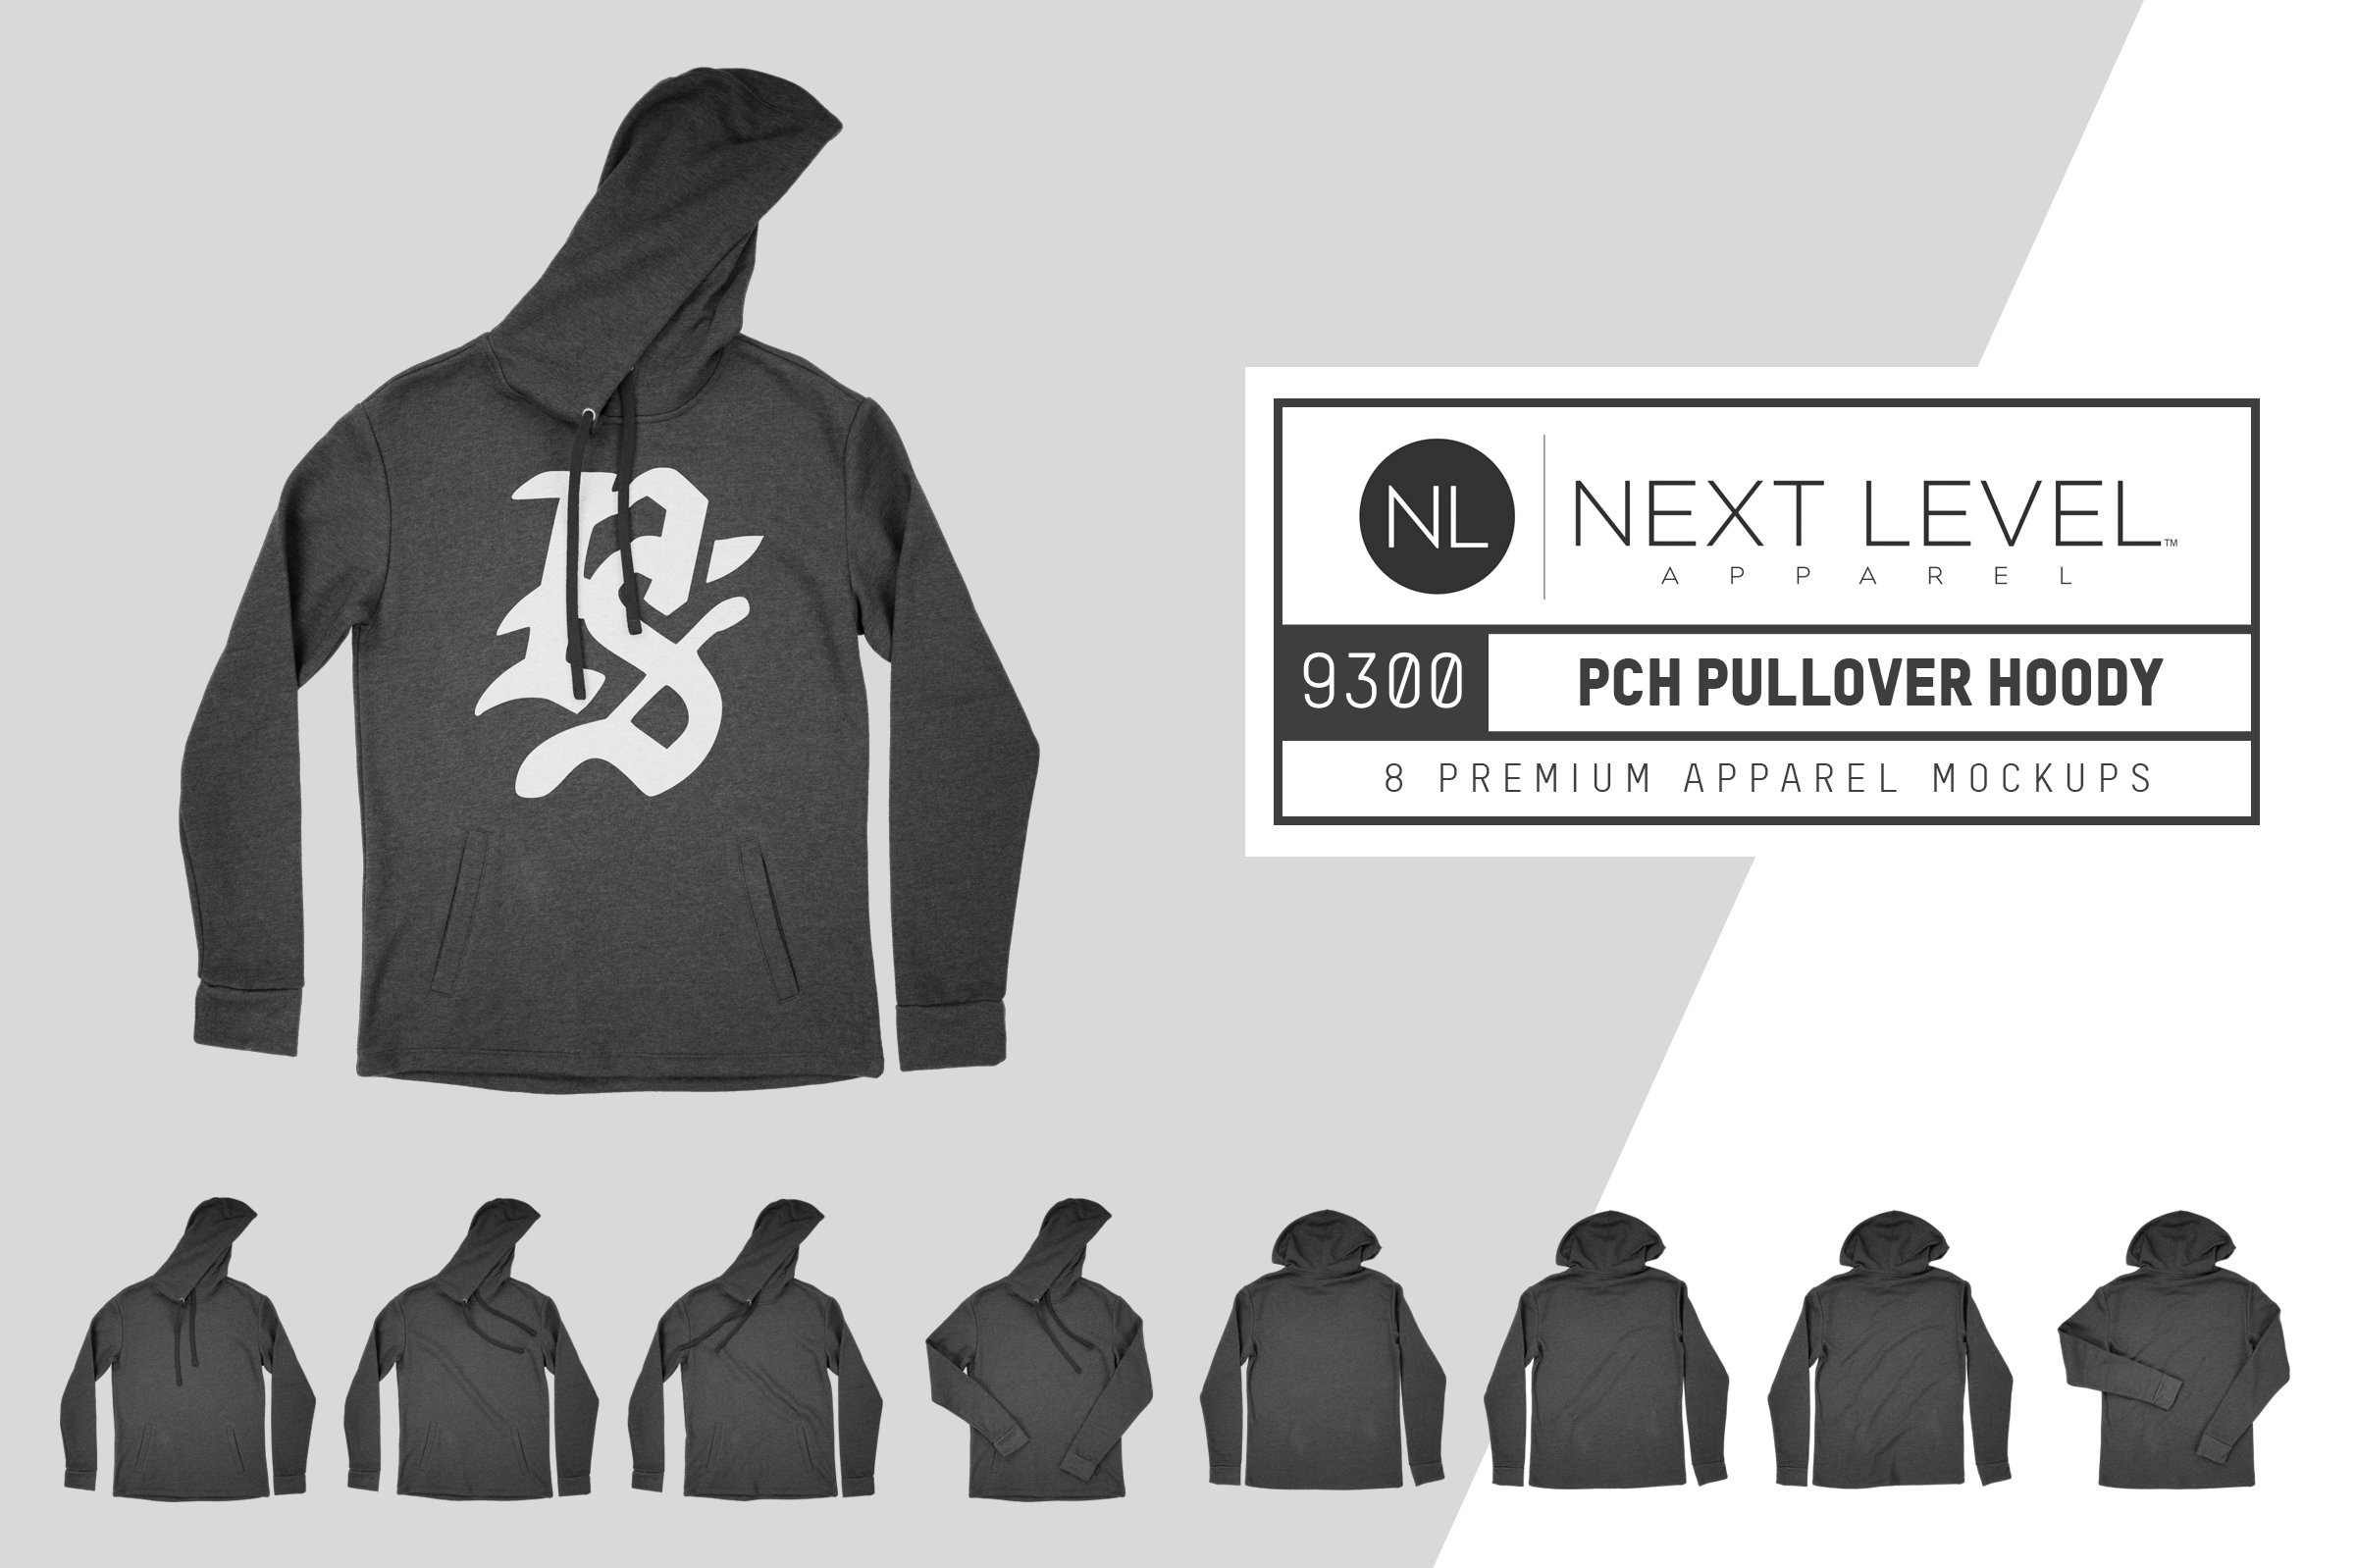 Next Level 9300 PCH Pullover Hoody cover image.